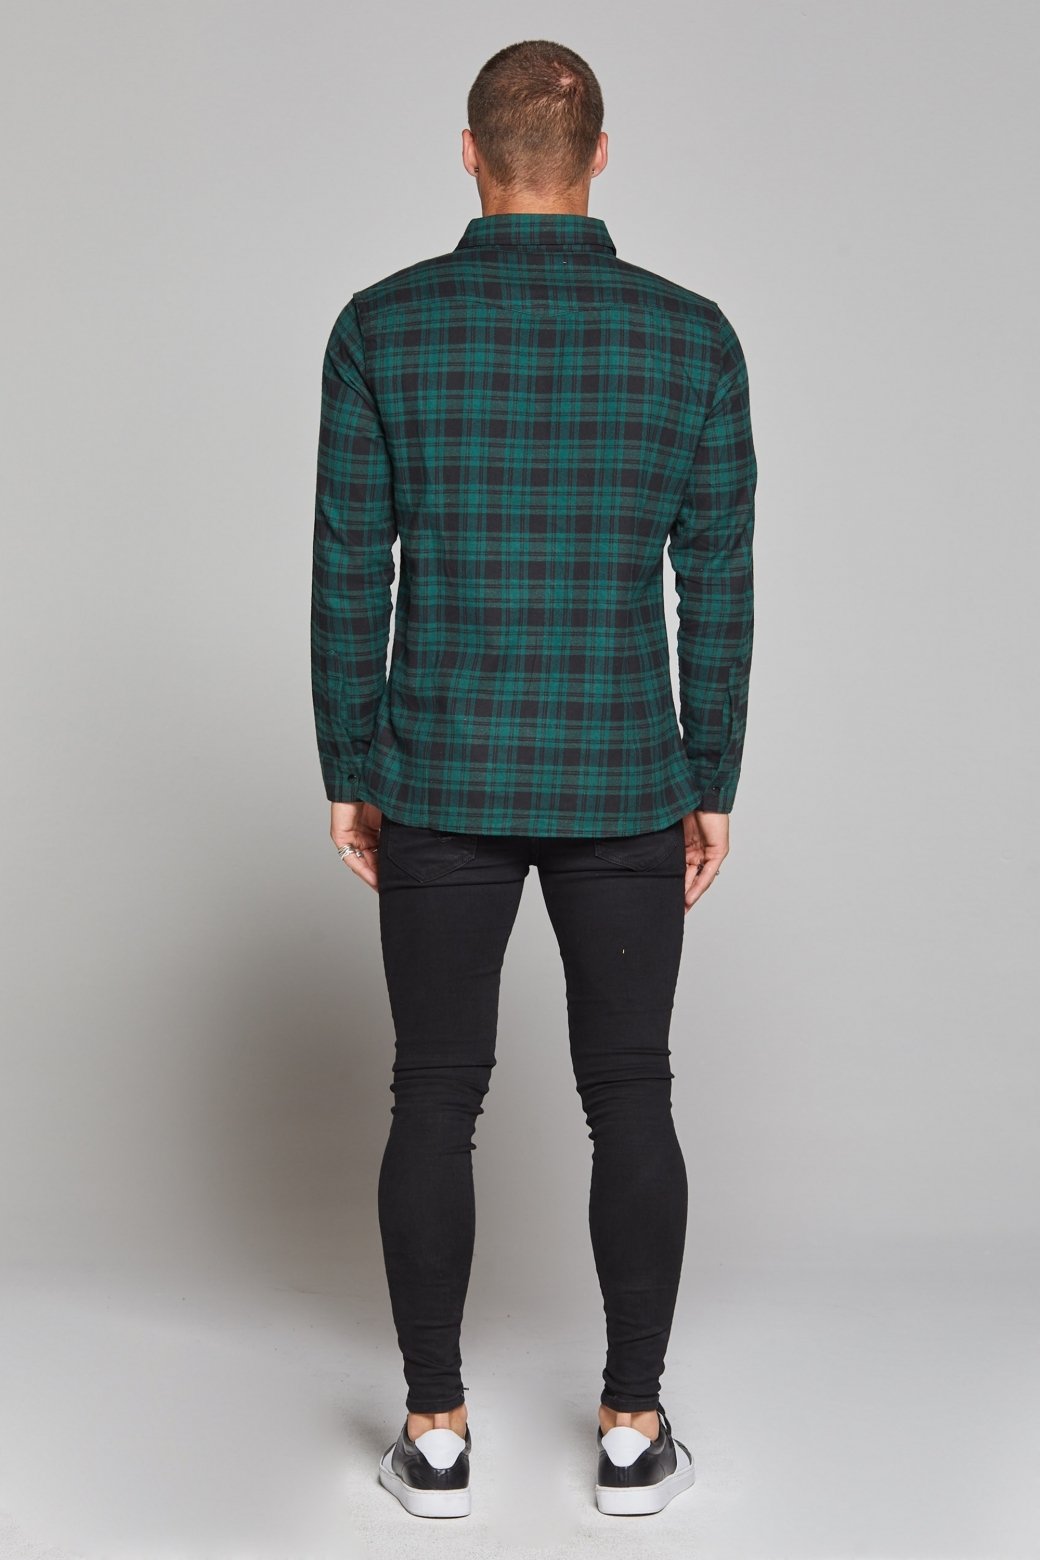 Check Flannel Green Shirt Buy Good For Nothing available in store USA Fresh Clothing DC Washington DC 